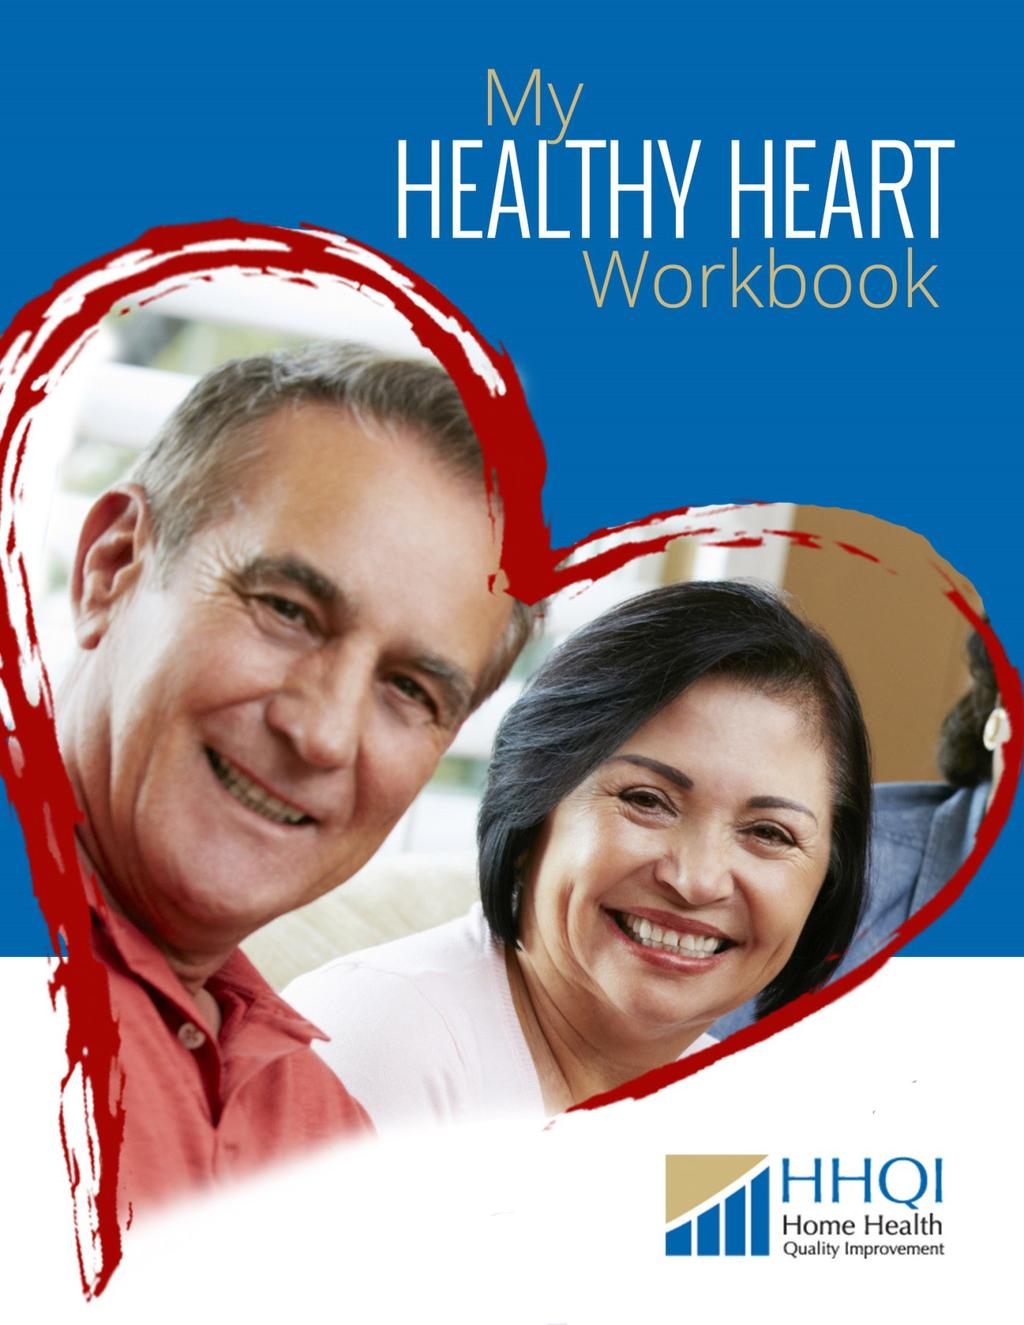 You have already begun to reduce your risk for heart attack and stroke just by reading this workbook.